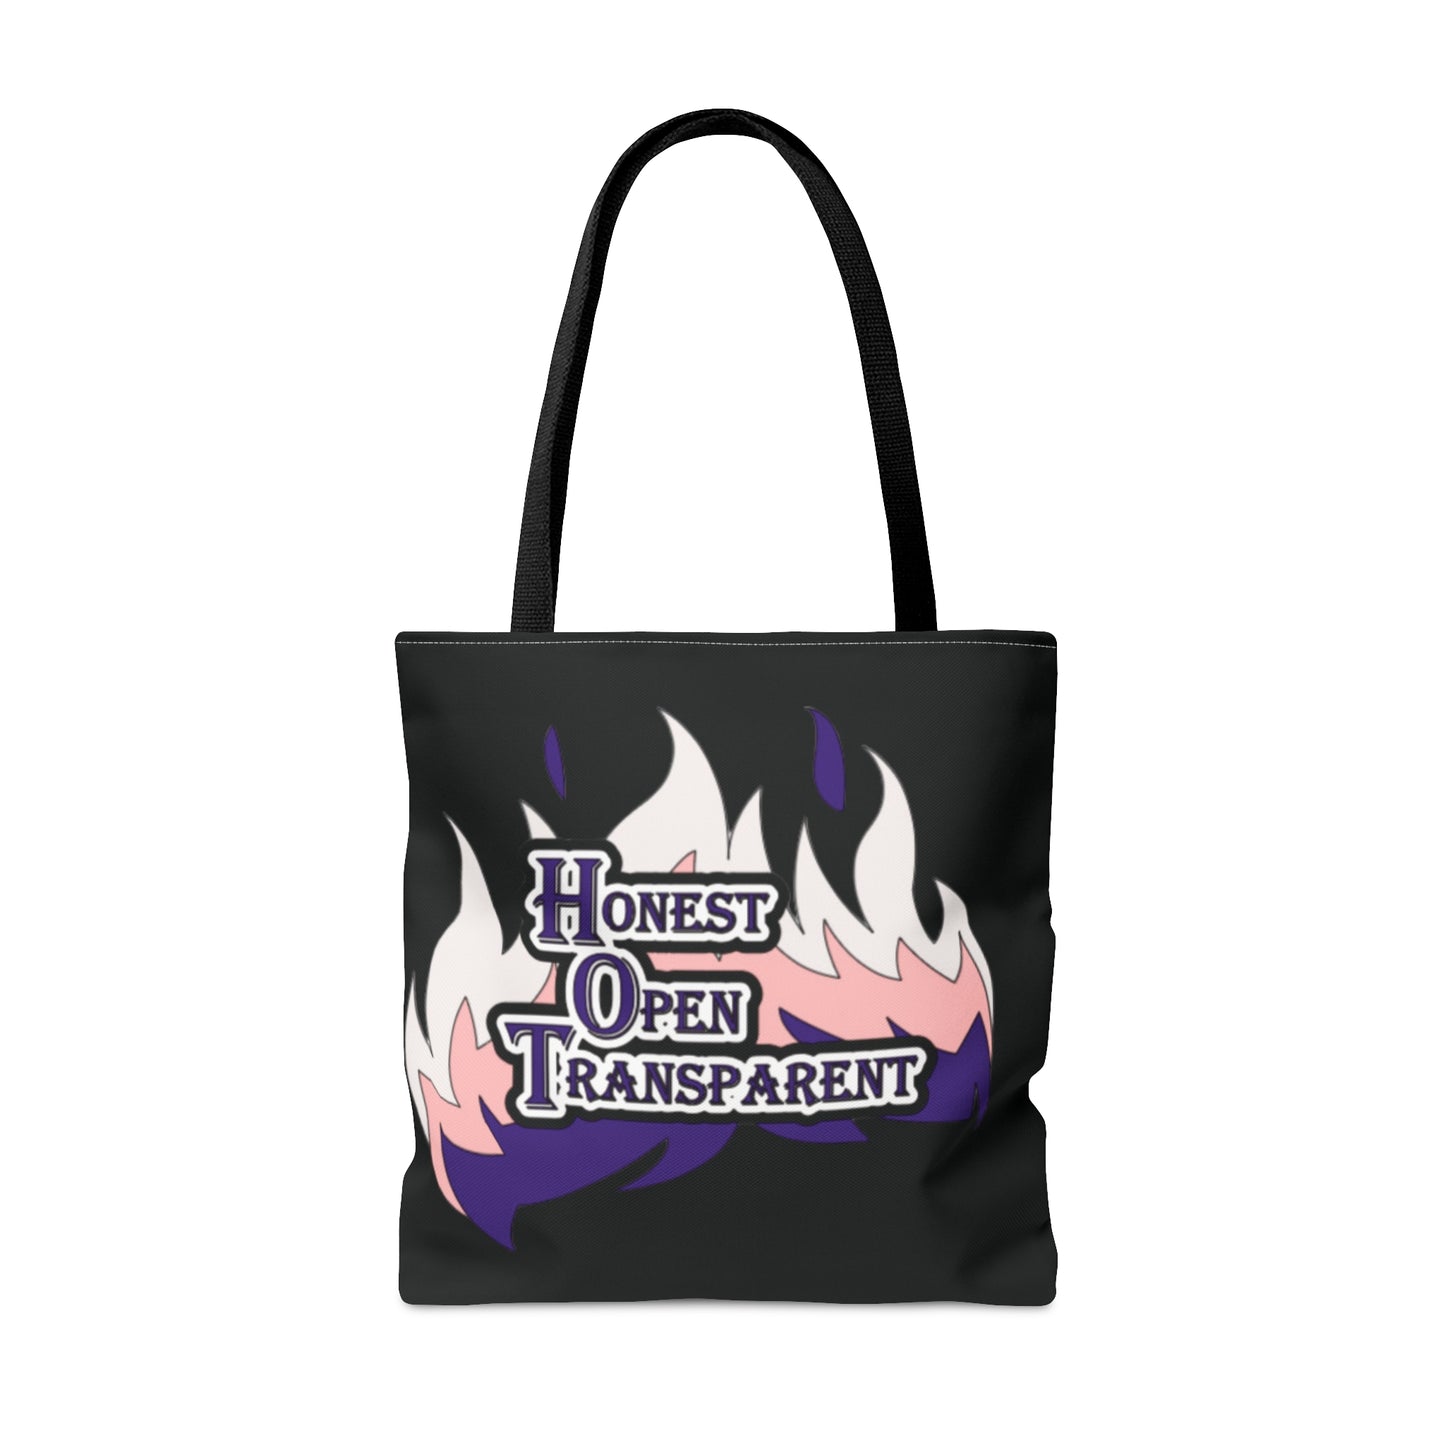 H.O.T. Honest, Open, and Transparent Tote Bag